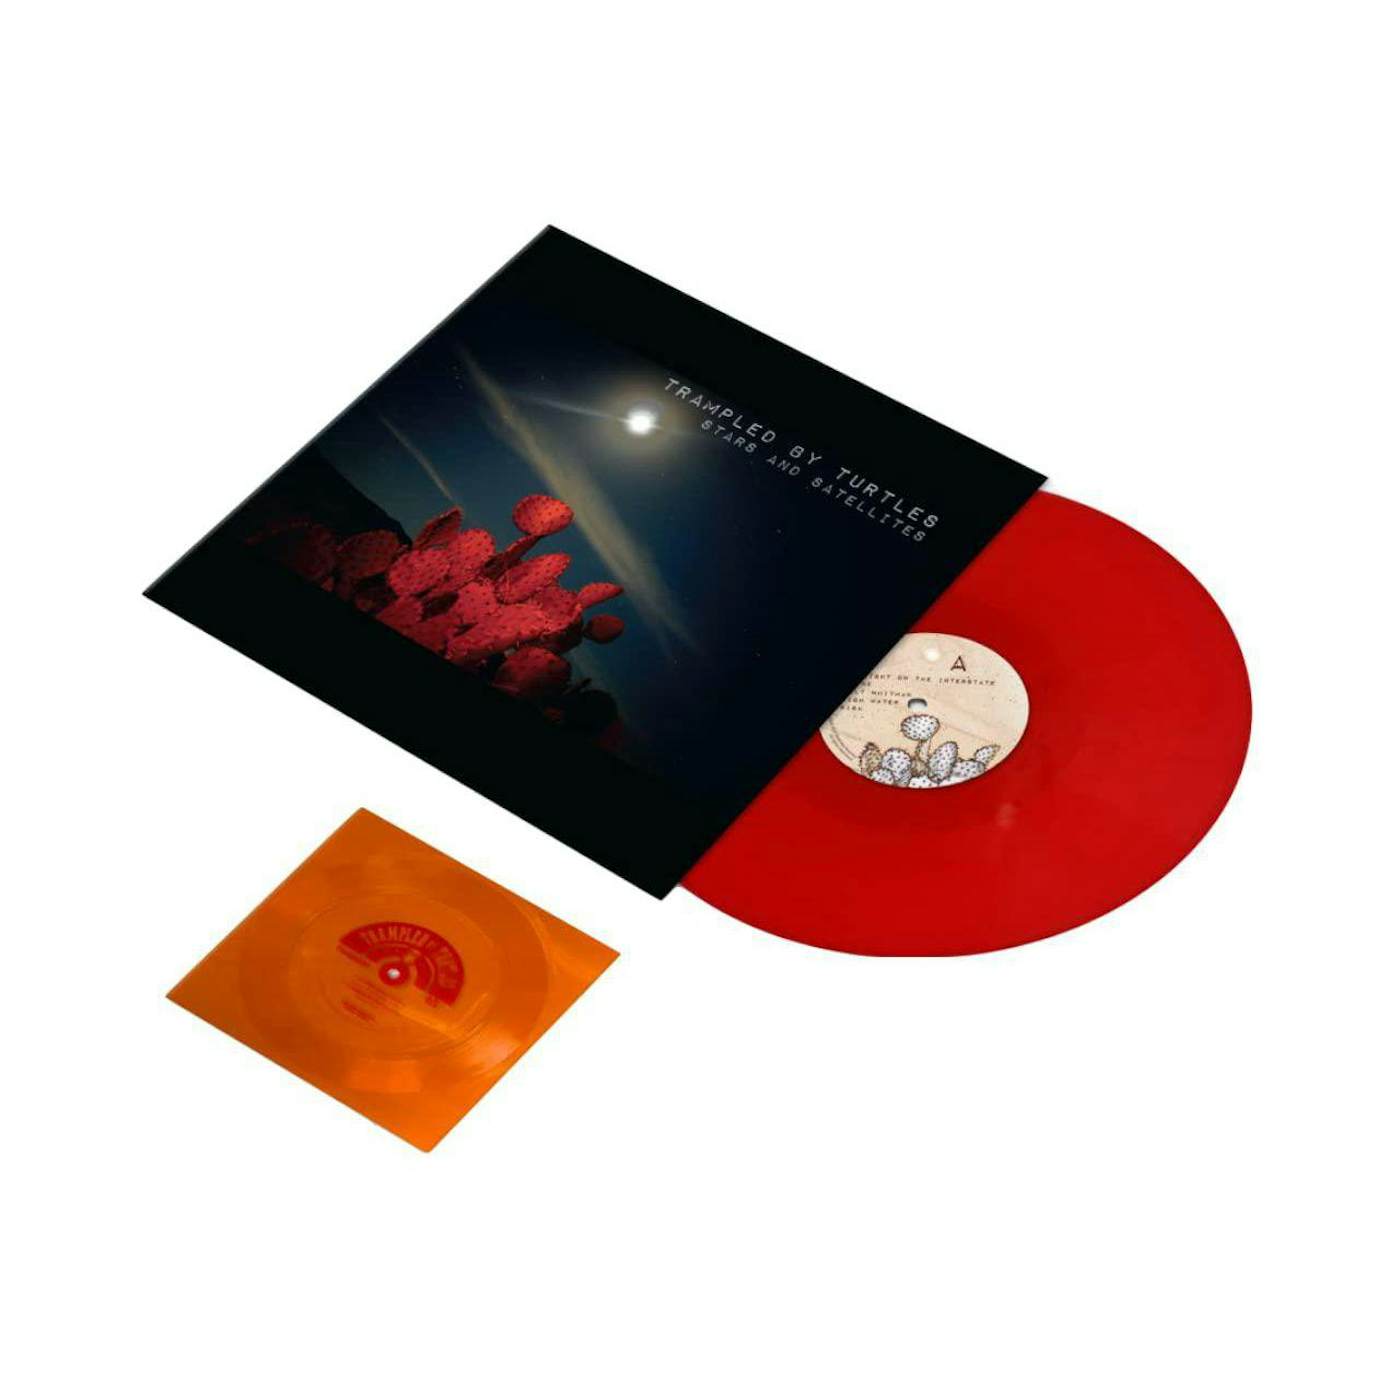 Trampled by Turtles Stars And Satellites (10 Year Anniversary) [Limited Edition Red LP + Bonus Orange Flexi Disc] Vinyl Record